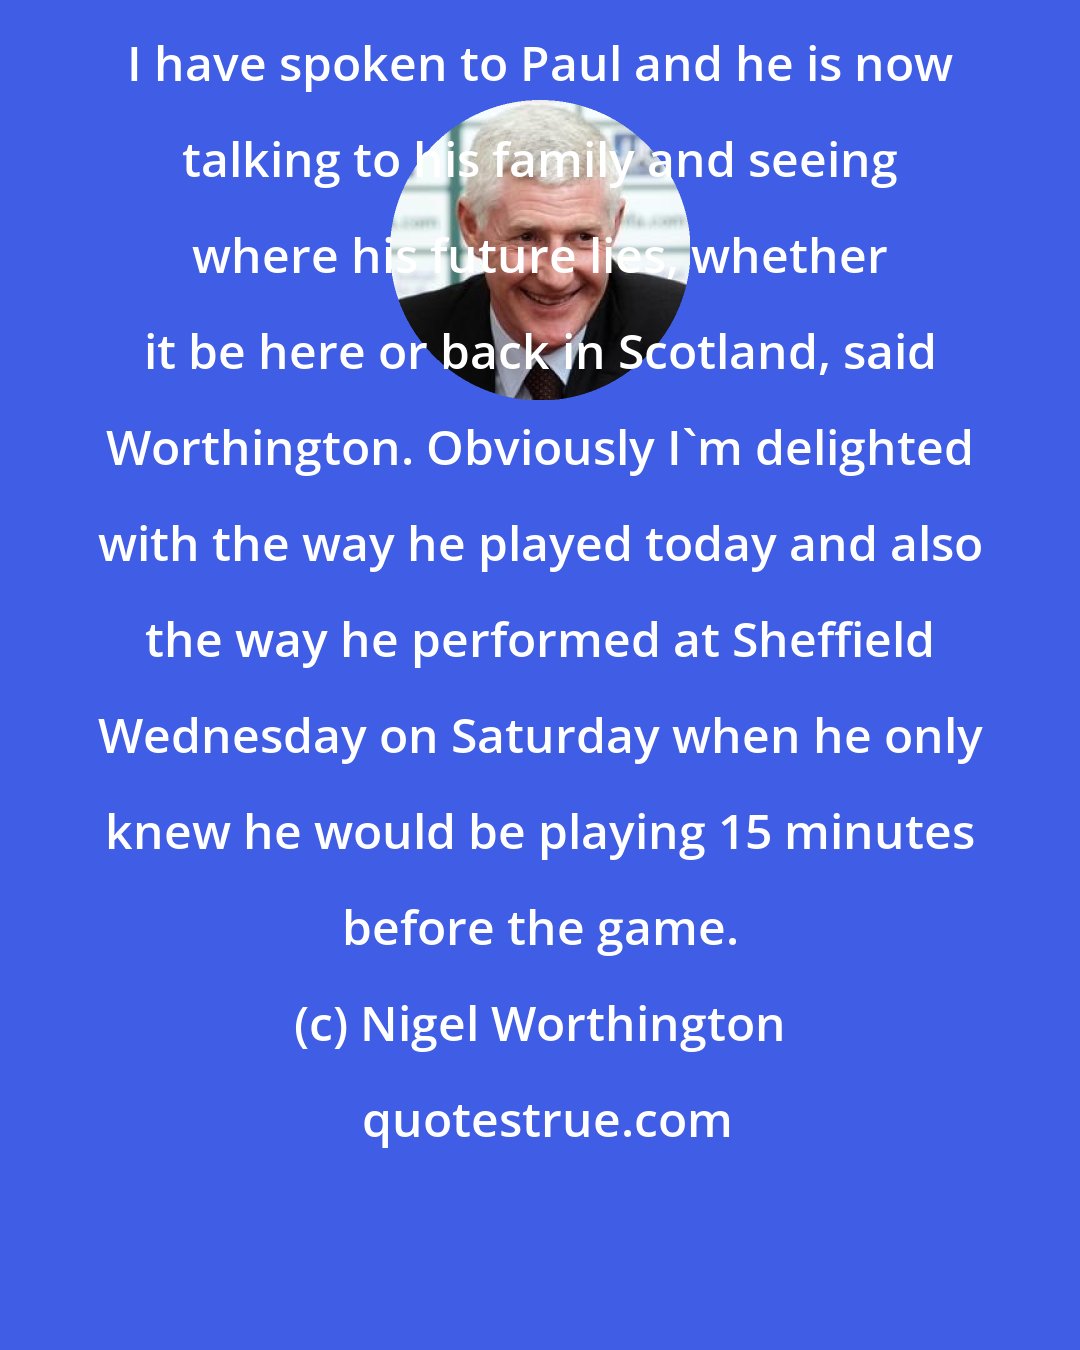 Nigel Worthington: I have spoken to Paul and he is now talking to his family and seeing where his future lies, whether it be here or back in Scotland, said Worthington. Obviously I'm delighted with the way he played today and also the way he performed at Sheffield Wednesday on Saturday when he only knew he would be playing 15 minutes before the game.